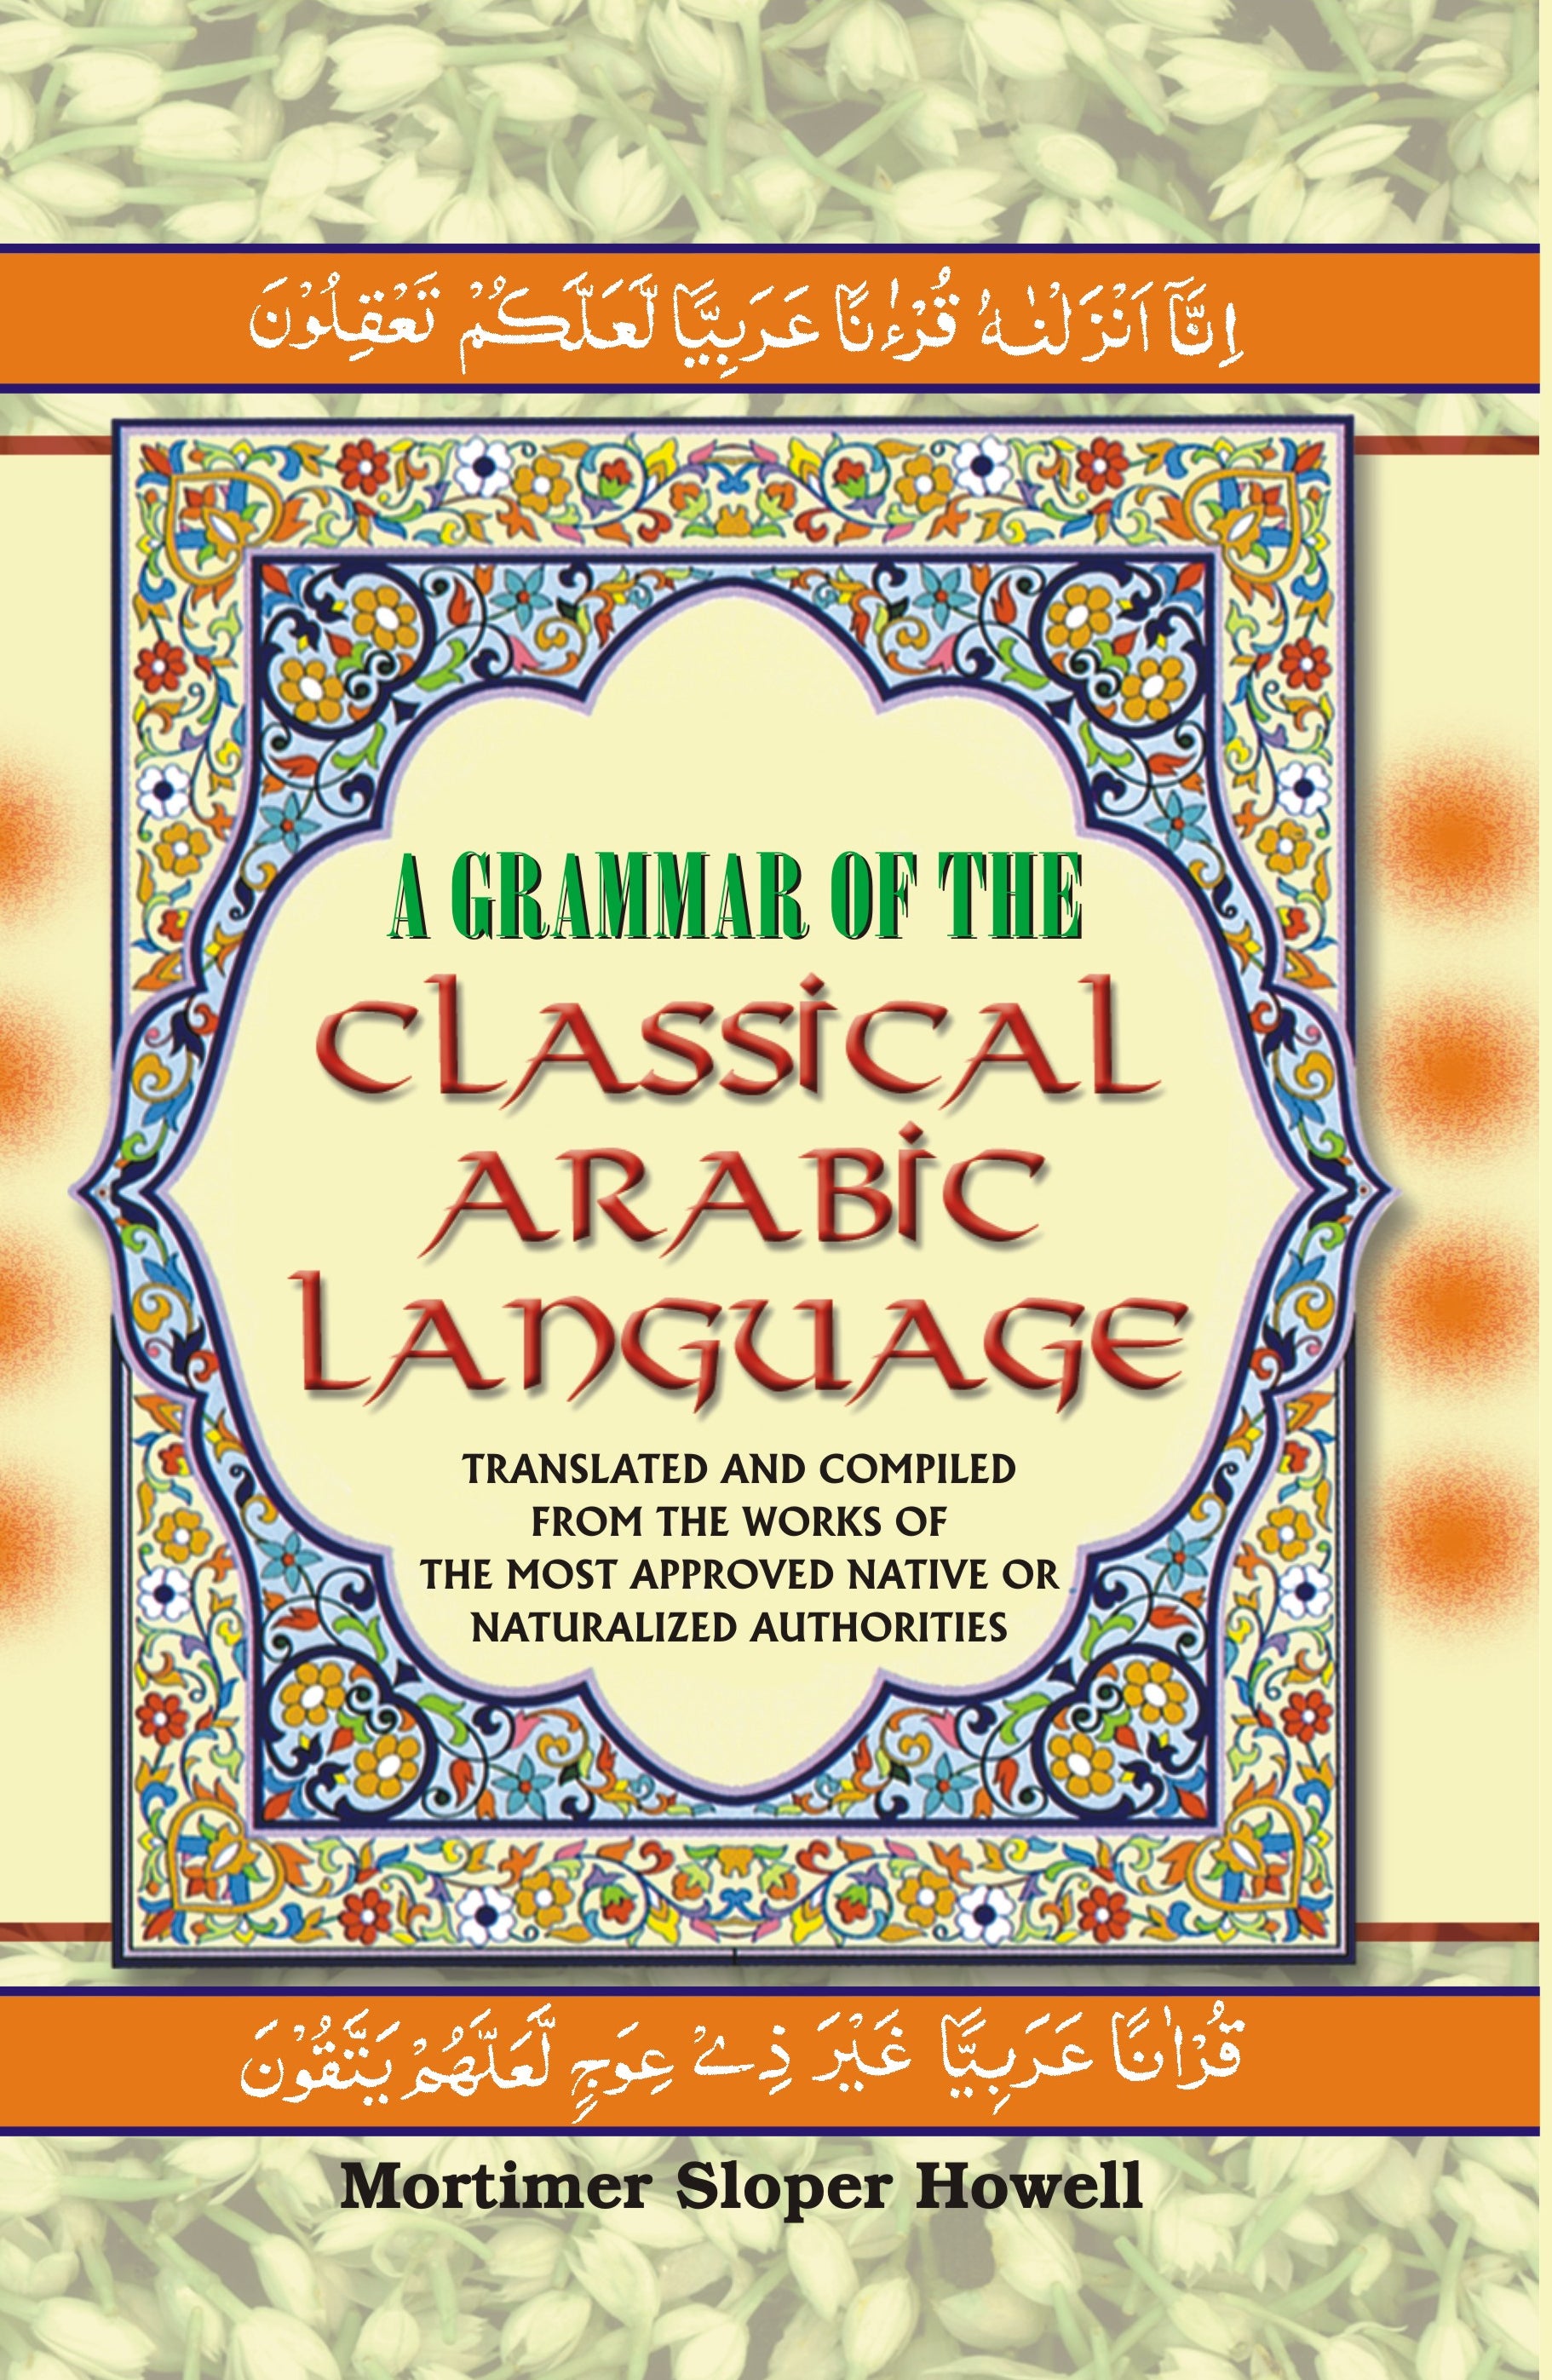 A Grammar of the Classical Arabic Language : Translated and Compiled From the Works of the Most Approved Native Or Naturalized Authorities (The Introduction, The Noun - Part 4) Volume Vol. 4th [Hardcover]